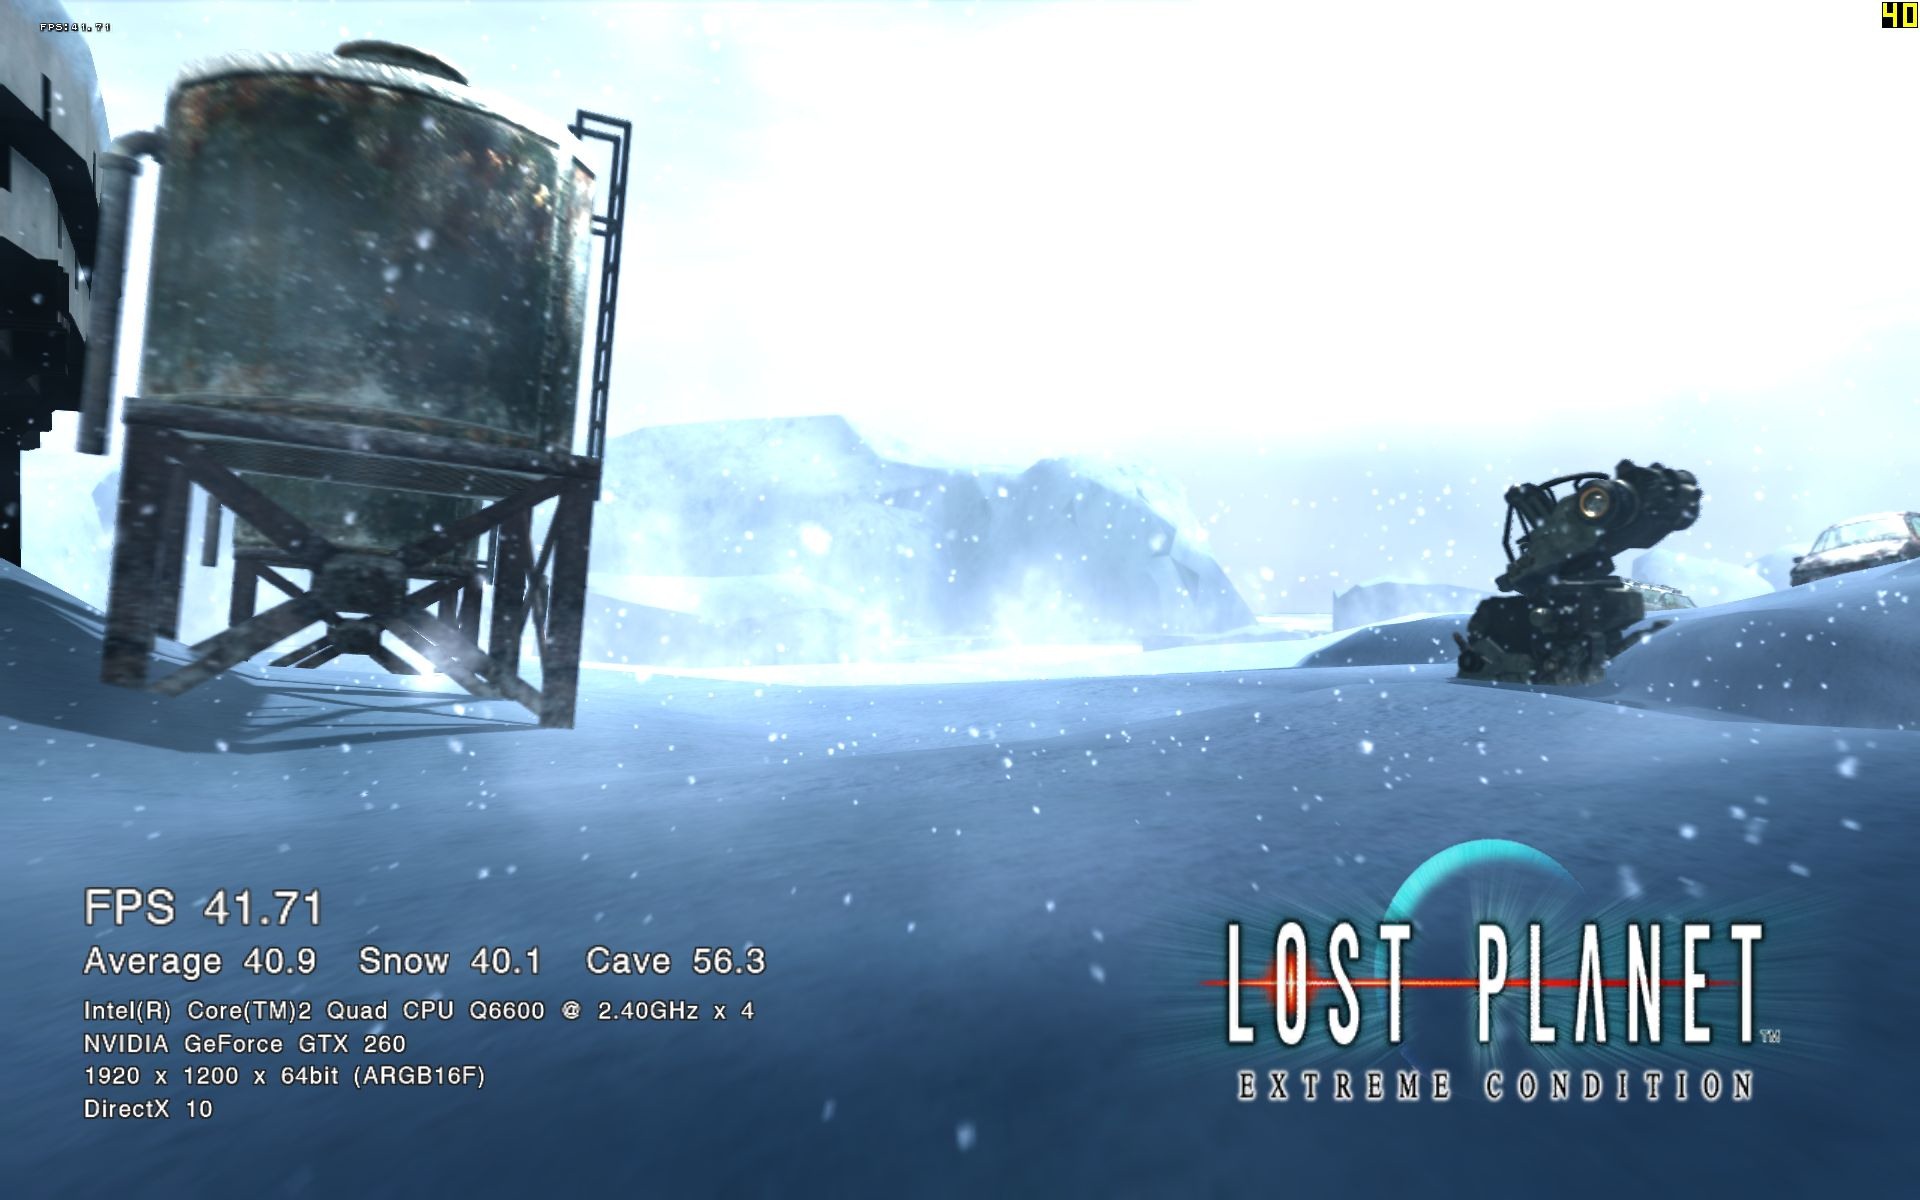 Lost Planet: Extreme Condition HD tapety na plochu #13 - 1920x1200